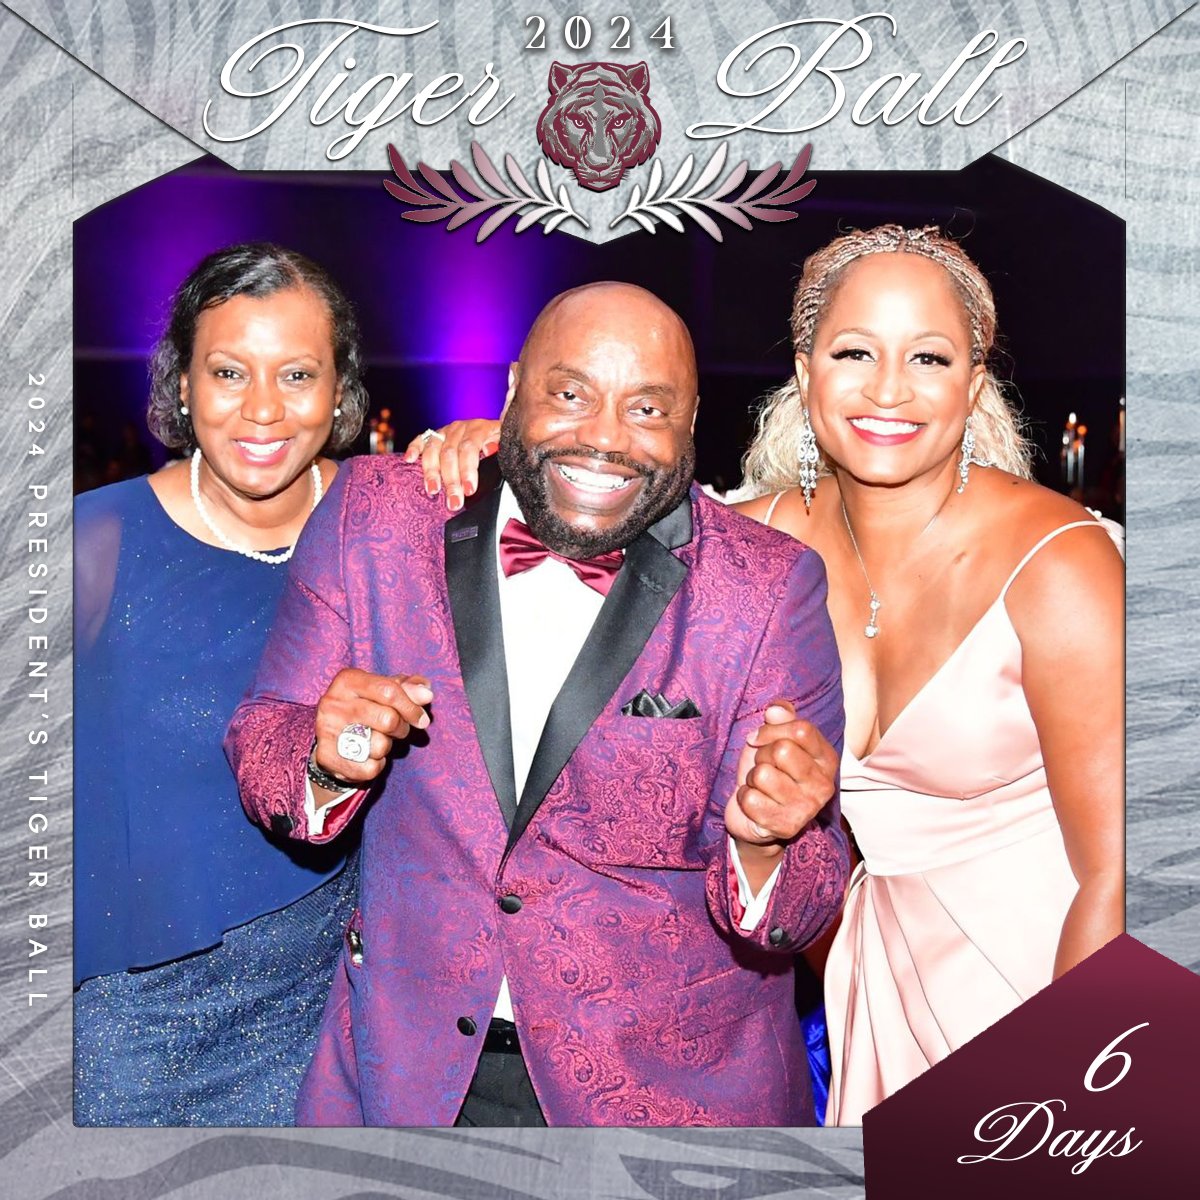 It is officially Tiger Ball week! The largest single fundraising event for student scholarships is just 6 days away! Tickets are still available. To support this year's Tiger Ball, visit: tsu.edu/tigerball/. #TSUProud #TexasSouthern #TSU #TSUTigerBall